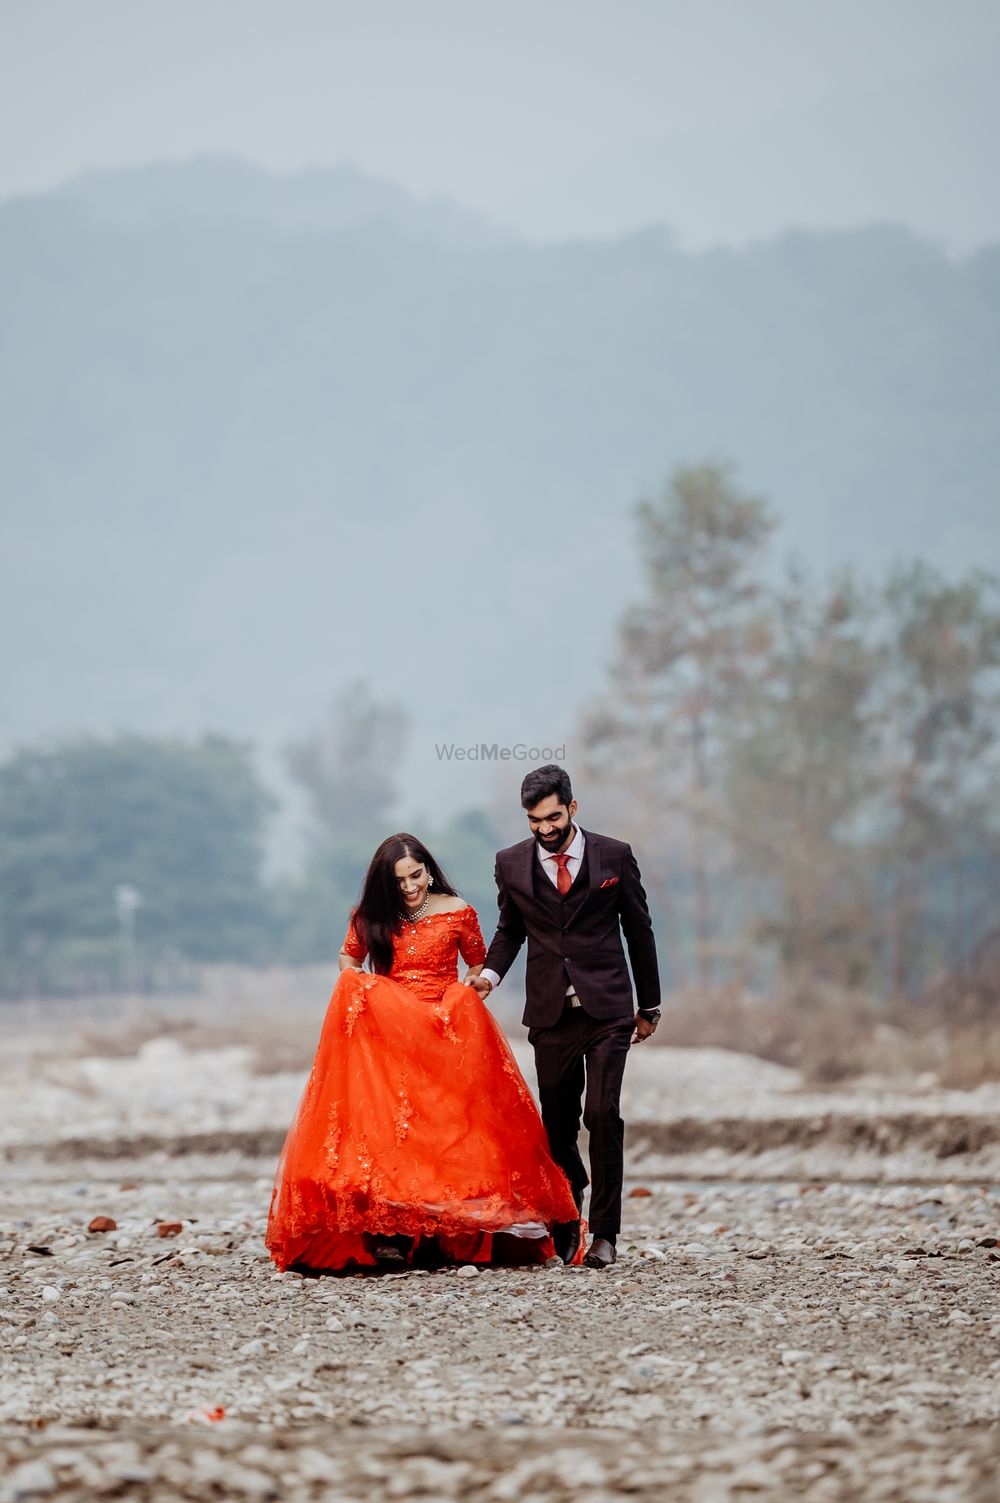 Photo From Shubham & Shilpi - By SD Photography